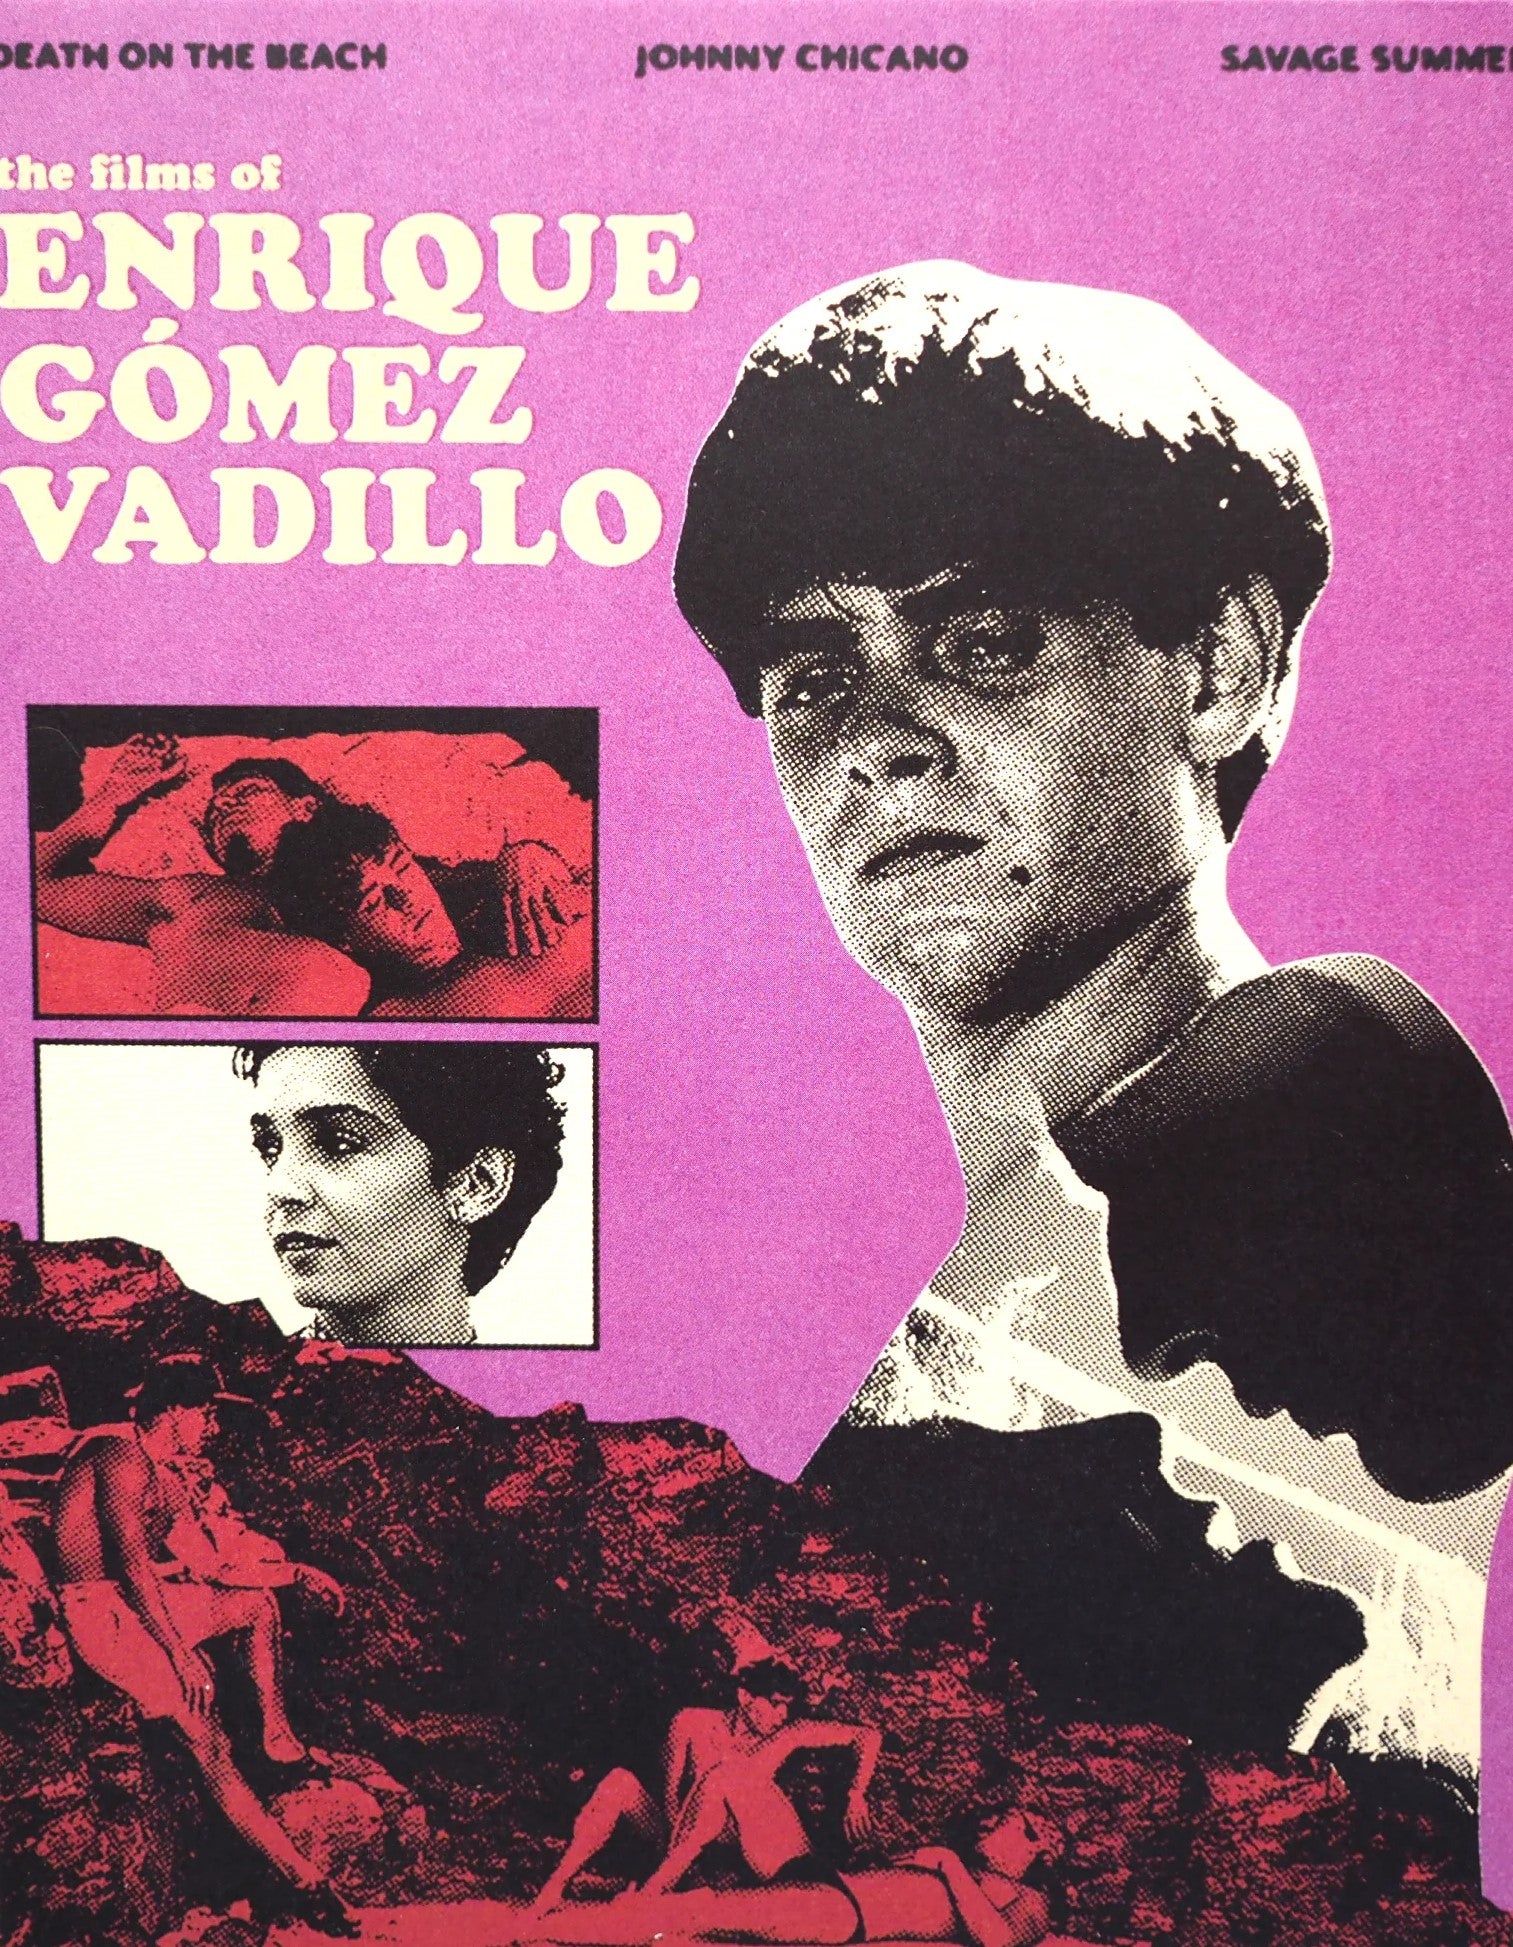 THE FILMS OF ENRIQUE GOMEZ VADILLO (LIMITED EDITION) BLU-RAY